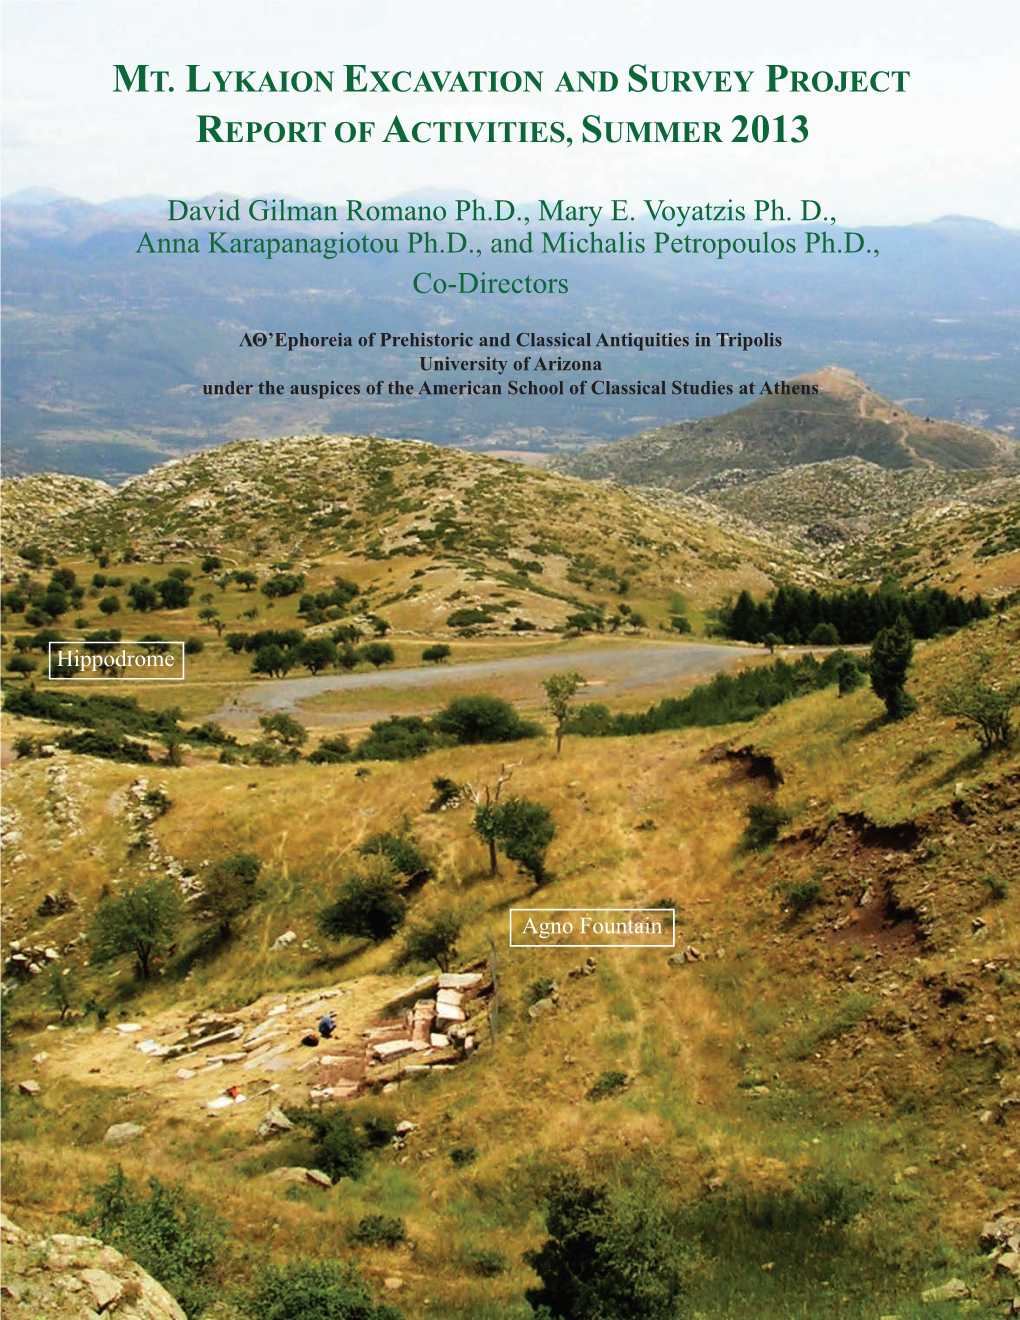 Mt. Lykaion Excavation and Survey Project Report of Activities, Summer 2013